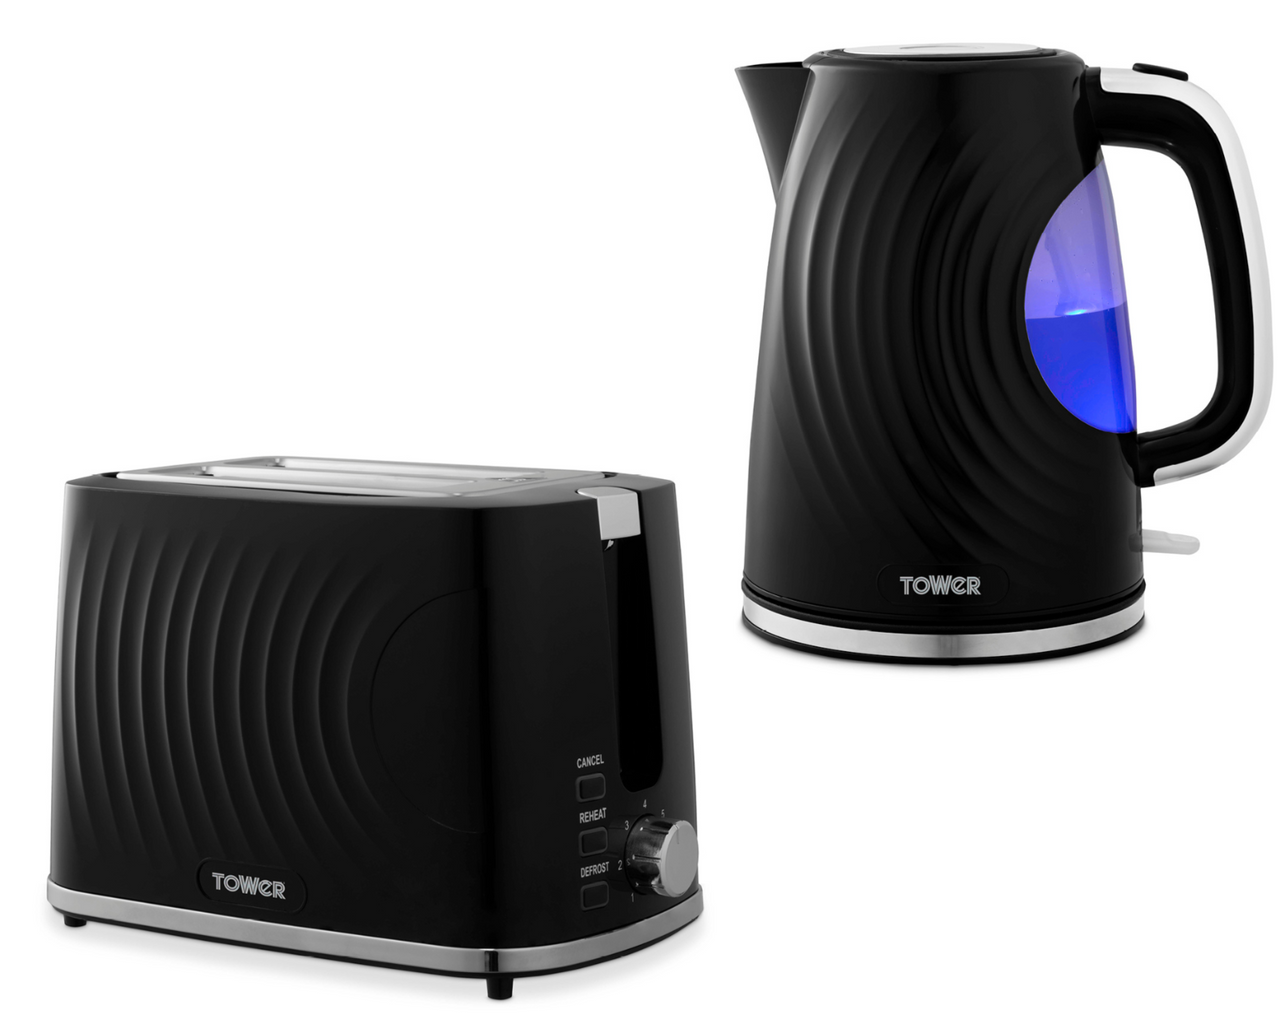 Tower Sonar 1.7L 3KW Kettle & 2 Slice Toaster. Black/Chrome Accents Stylish Ripple Design